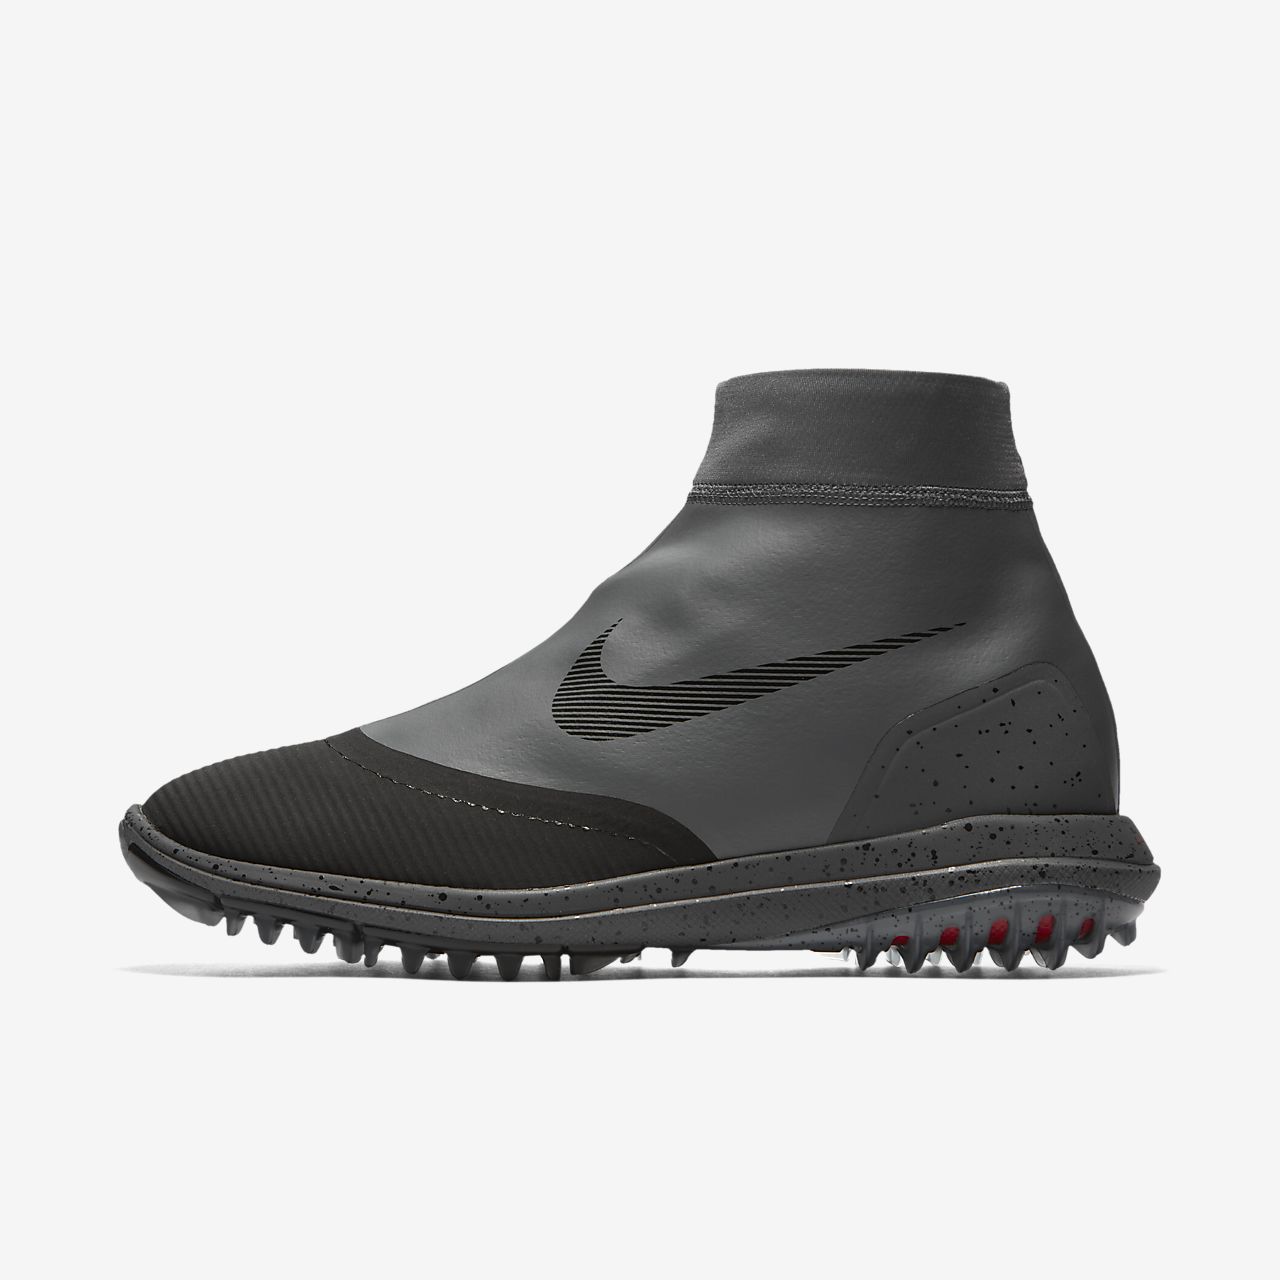 The 7 coolest Nike Golf shoes you can 